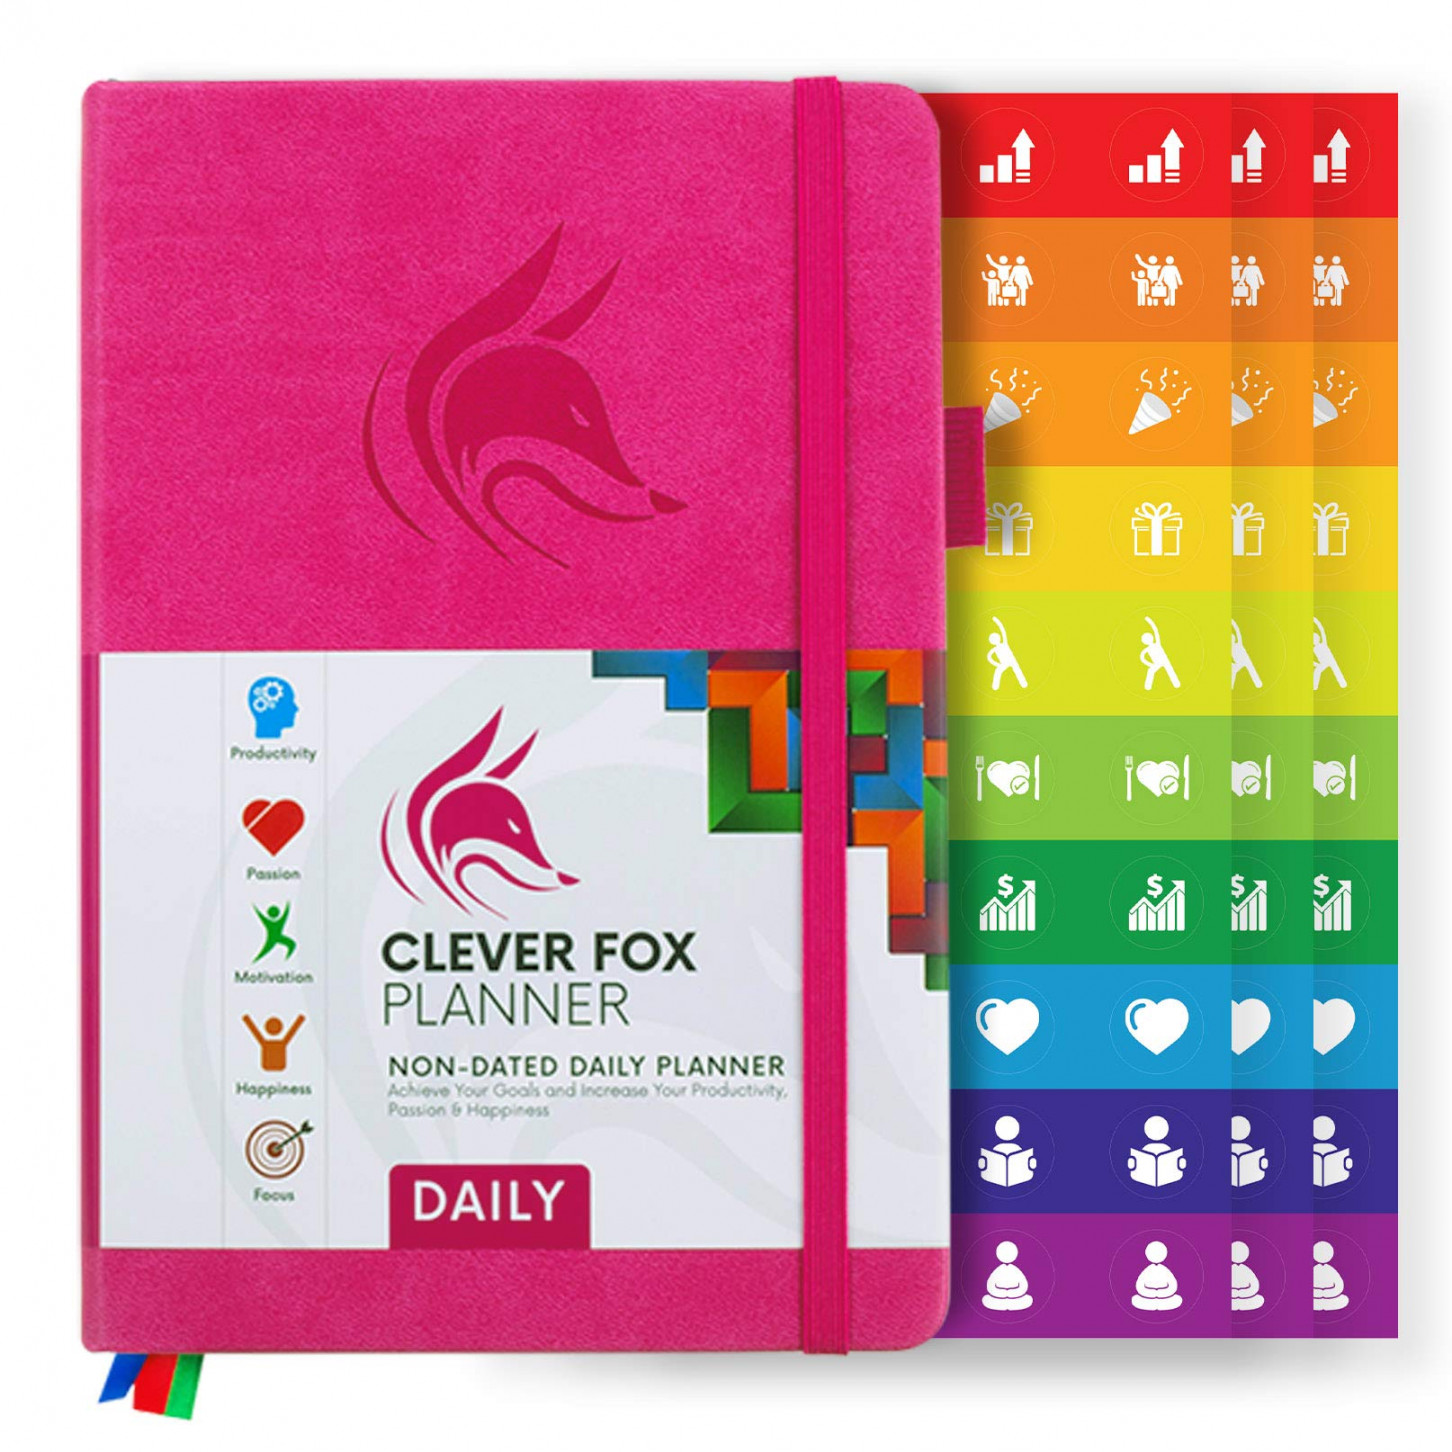 Clever Fox Planner Daily – Undated Agenda & Daily Calendar to Boost Productivity & Hit Your Goals – Gratitude Journal Personal Daily Organizer –